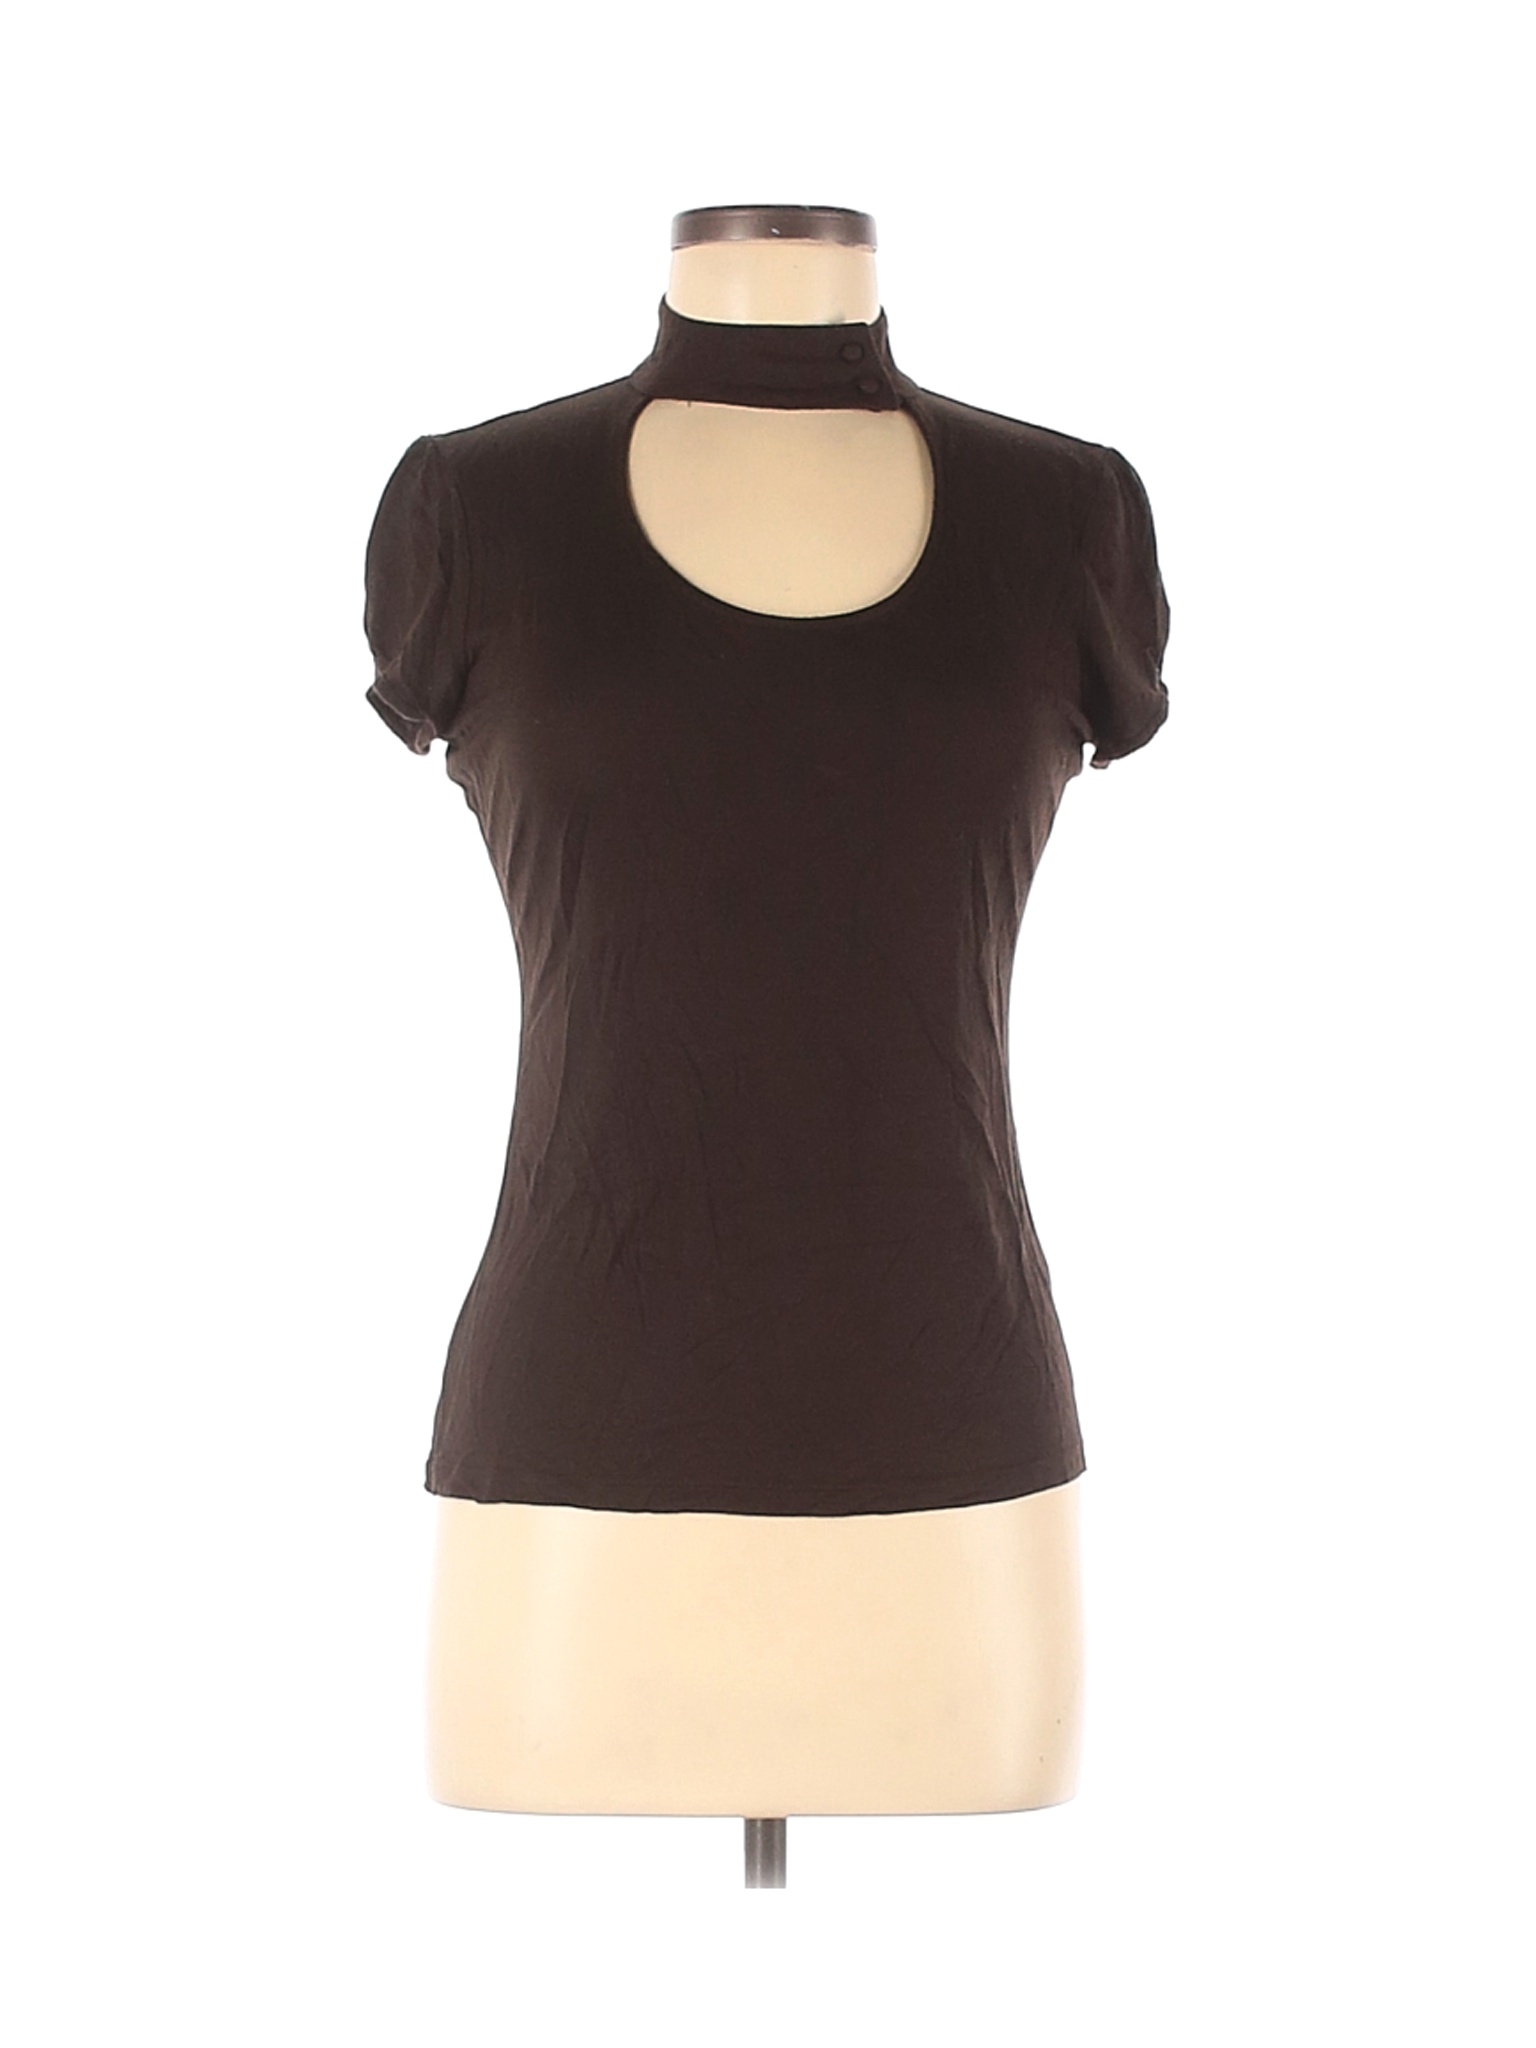 The Limited Women Brown Short Sleeve Top M | eBay